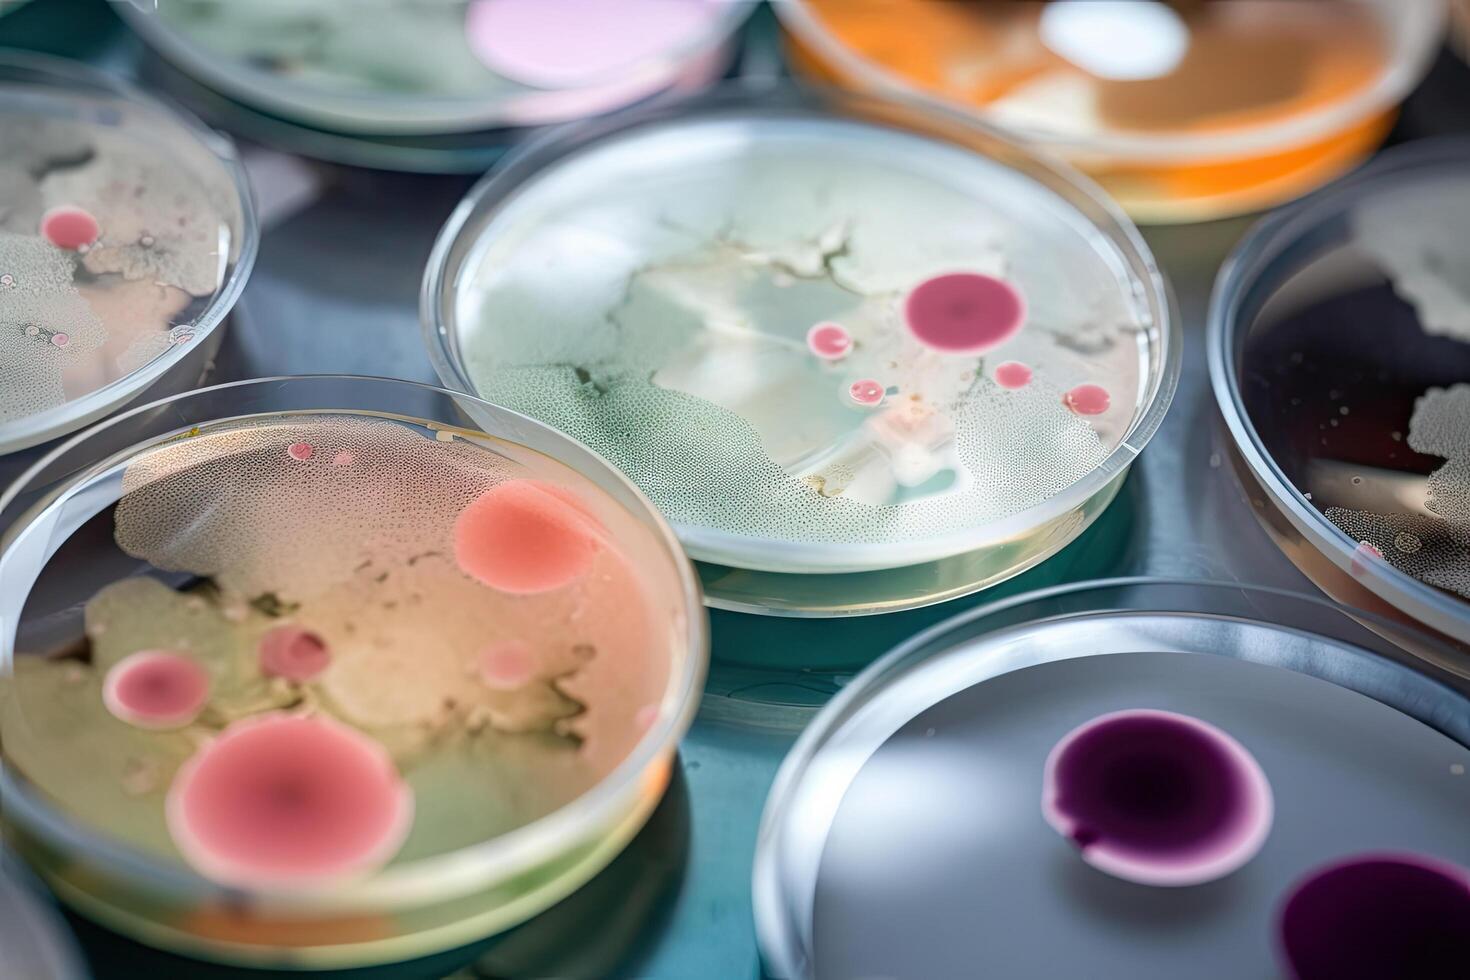 Colorful variety of microorganism inside petri dish plate in laboratory with super macro zoom background, including of bacteria, protozoa, algae, and fungi, with . photo